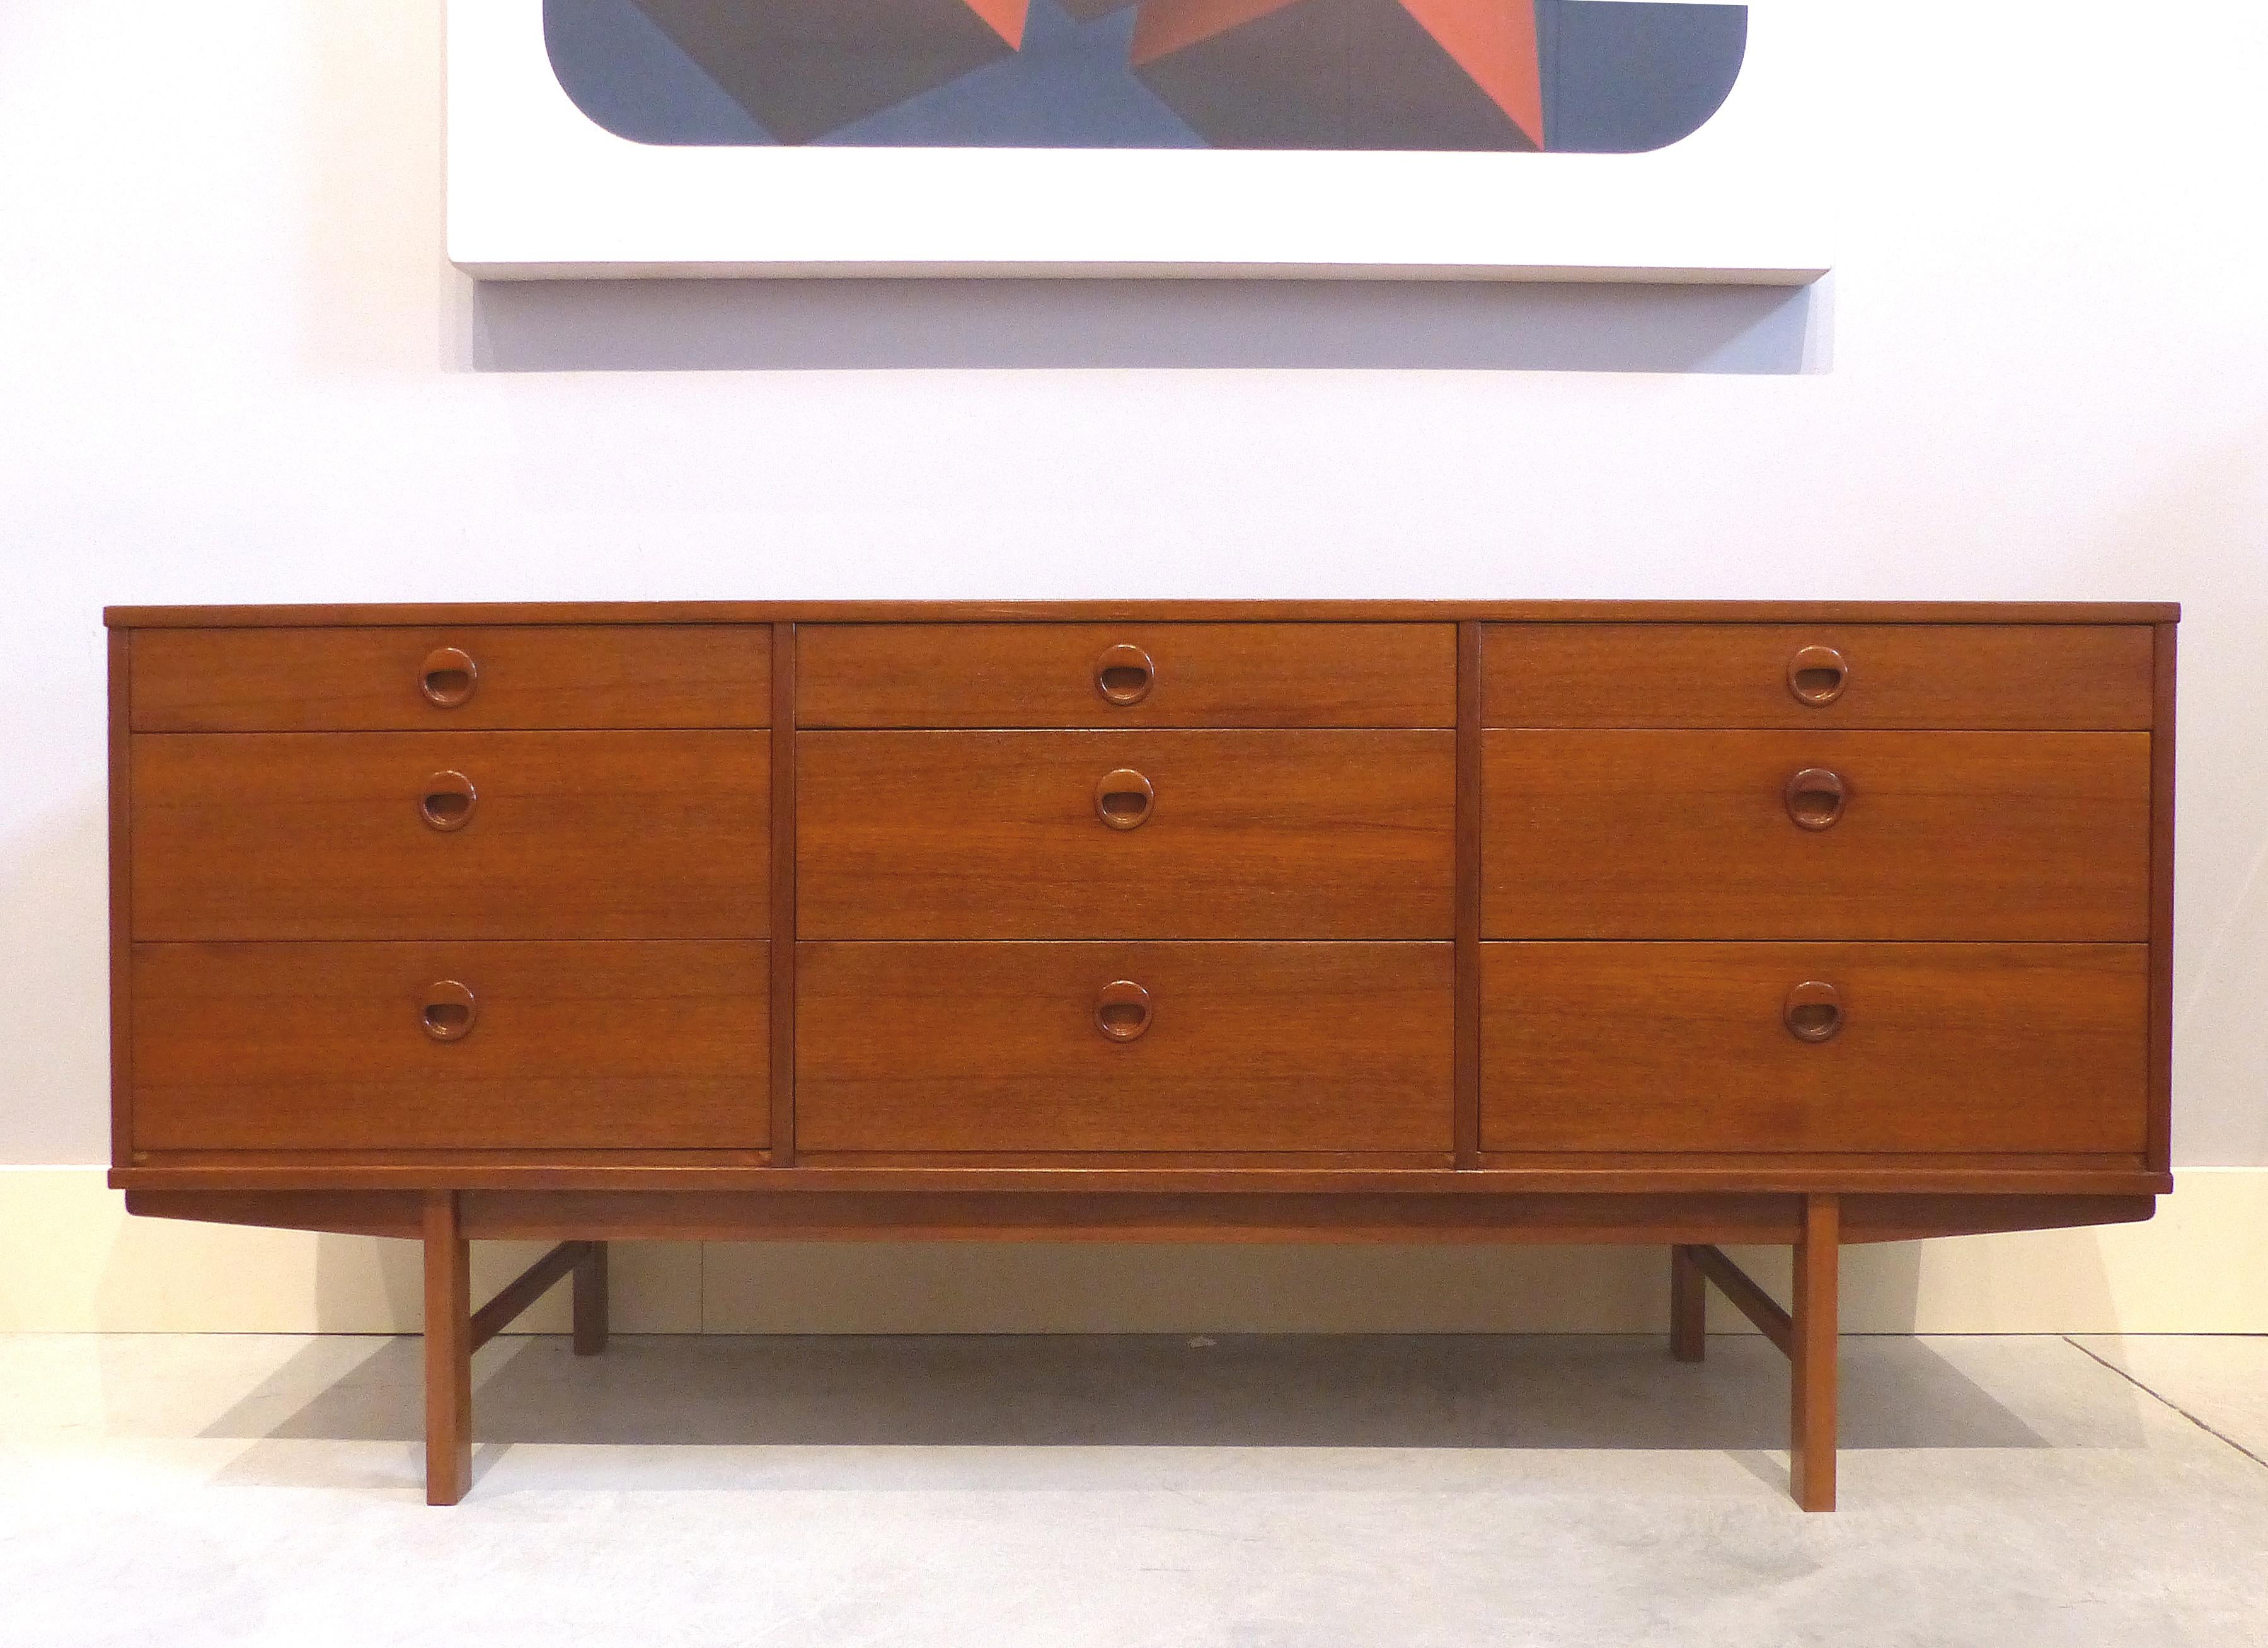 Offered for sale is a teak Danish Modern dresser by Folke Ohlsson for DUX. This 1950s cabinet has recently been refinished. The 9-drawer dresser offers three sets of matching drawers with the top centre drawer having divided compartments.

    